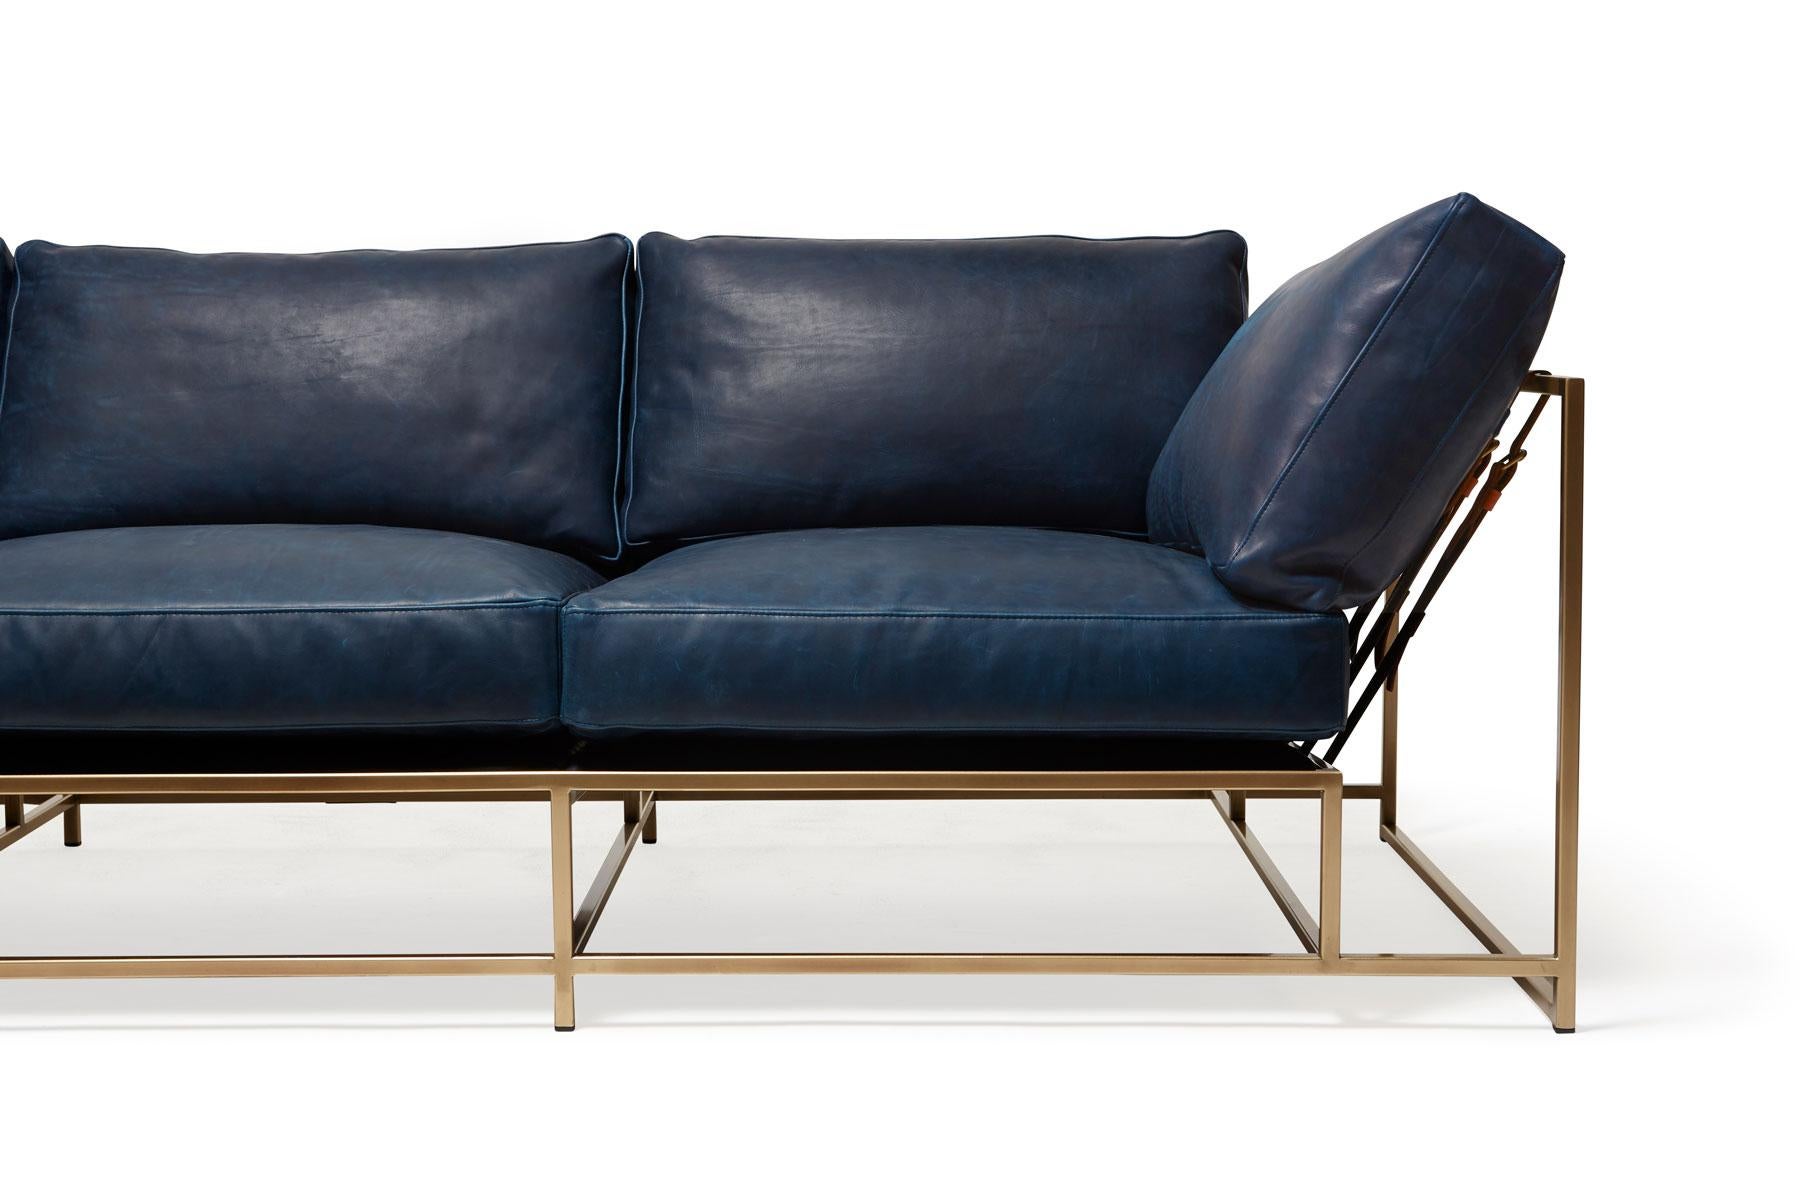 Metalwork Waxed Navy Leather & Antique Brass Sofa For Sale